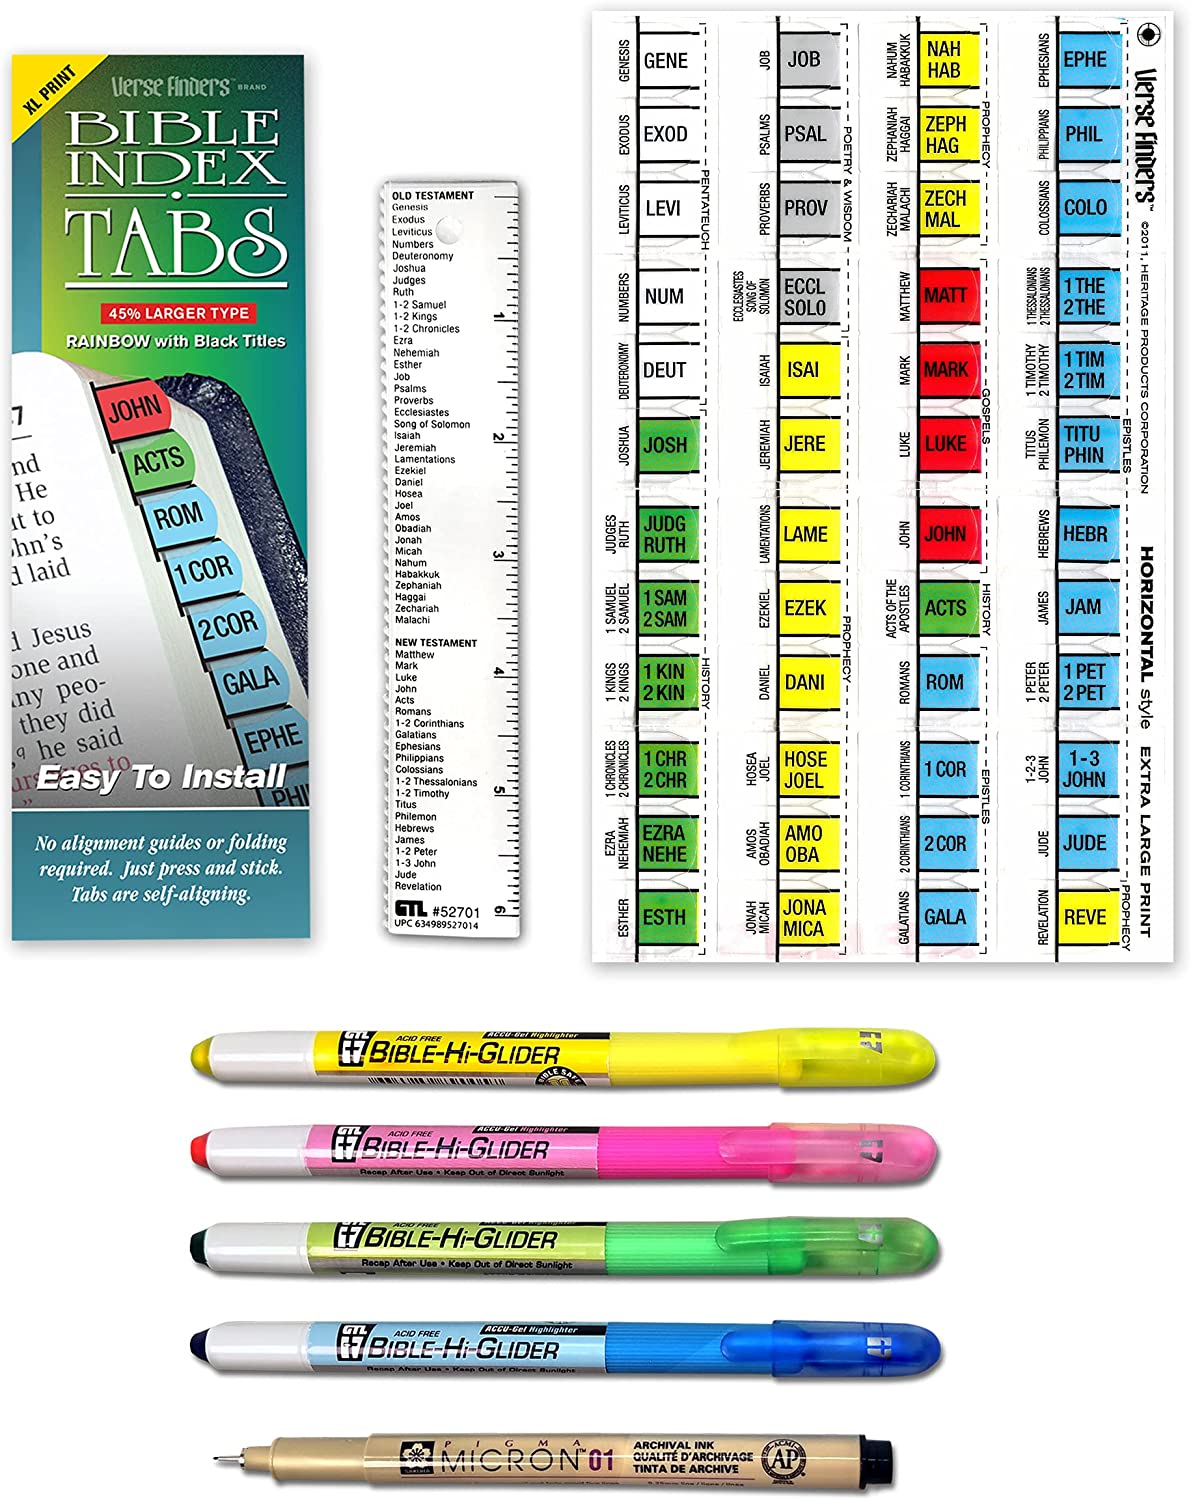 Accu-Gel & Pigma Micron Bible Study Starter Sets with Rainbow Verse Finder Bible Tabs 